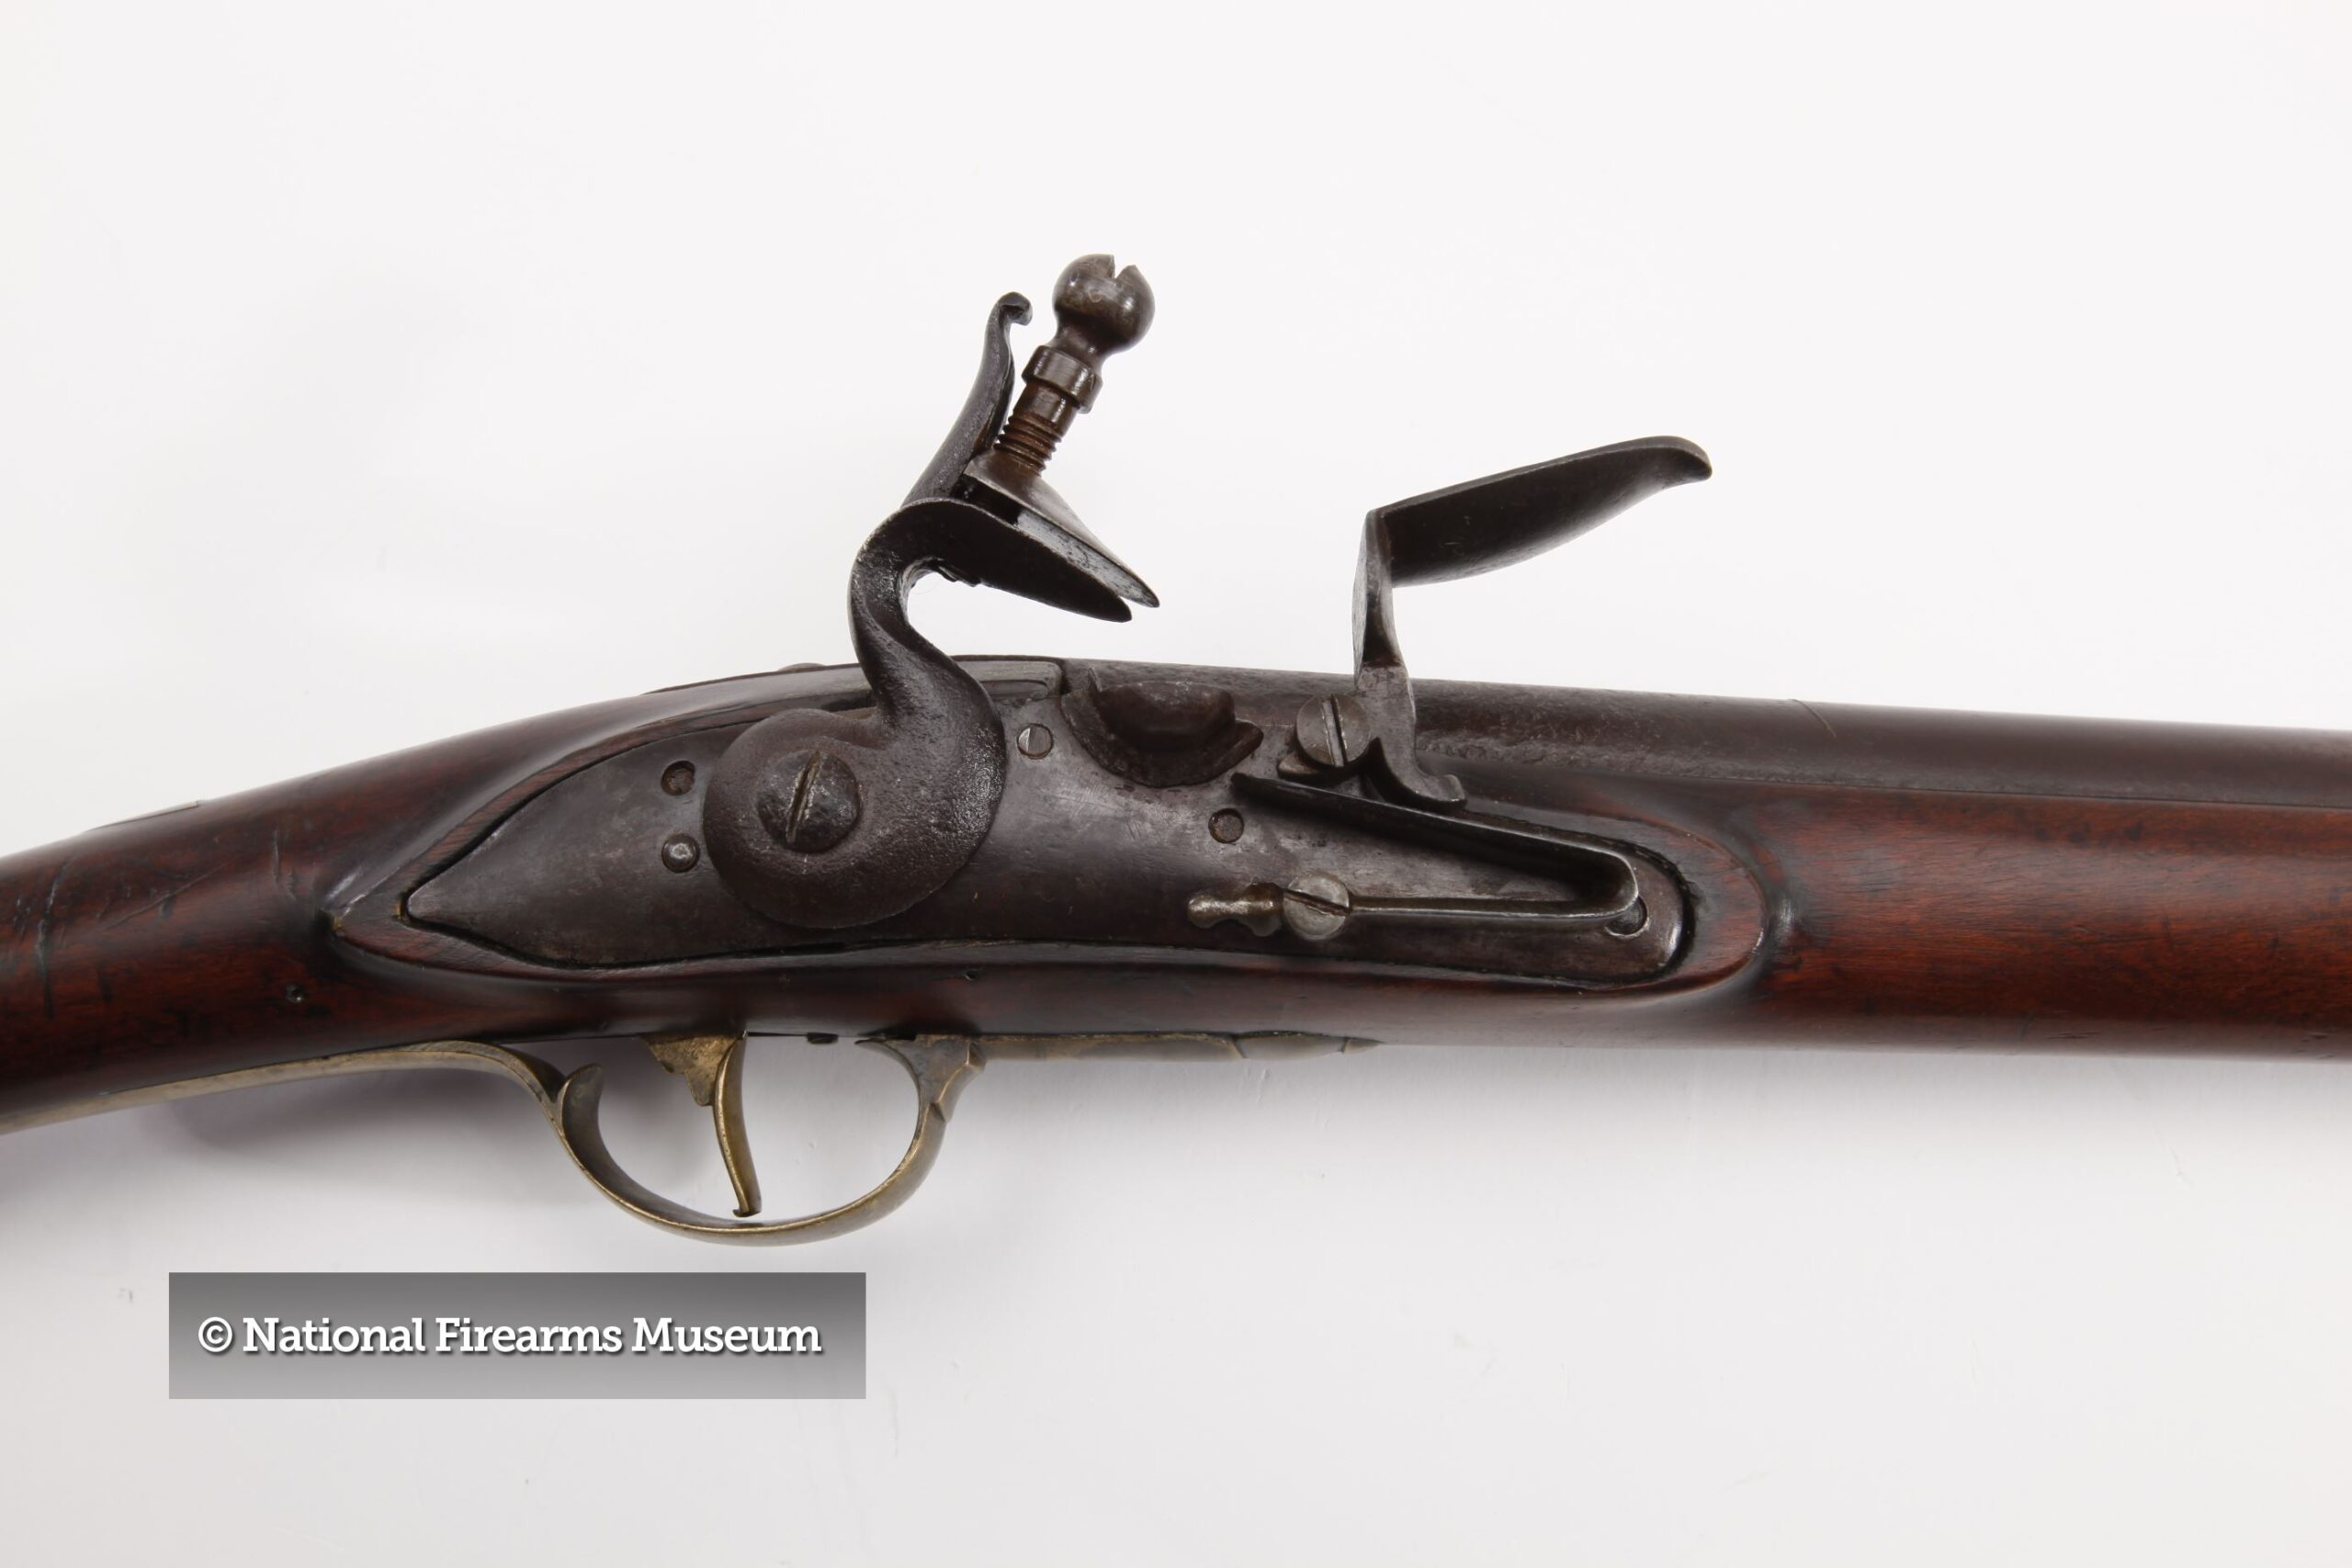 BLUNDERBUSS definition and meaning